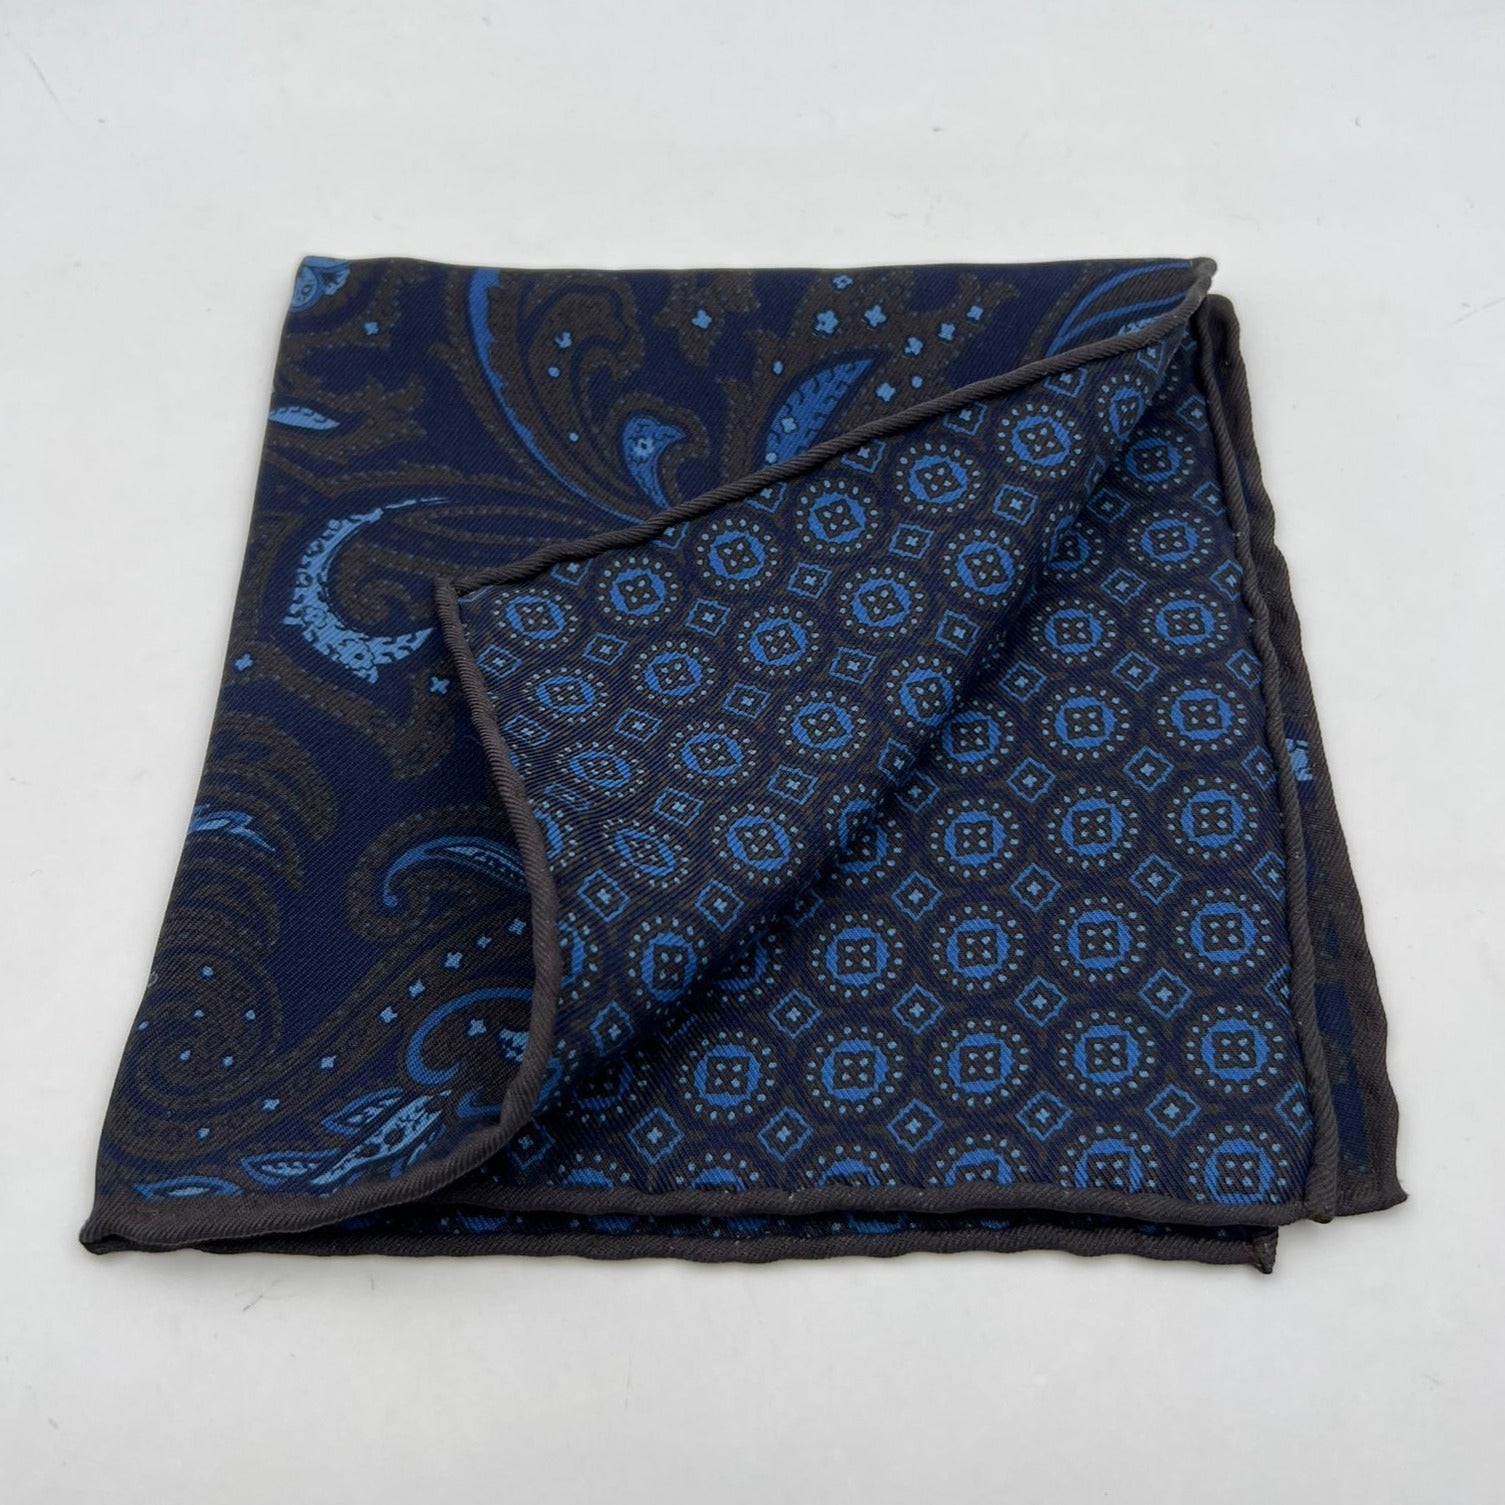 Holliday & Brown Hand-rolled   Holliday & Brown for Cruciani & Bella 100% Silk Blue, Brown  Double Faces Patterned  Motif  Pocket Square Handmade in Italy 32 cm X 32 cm #7029